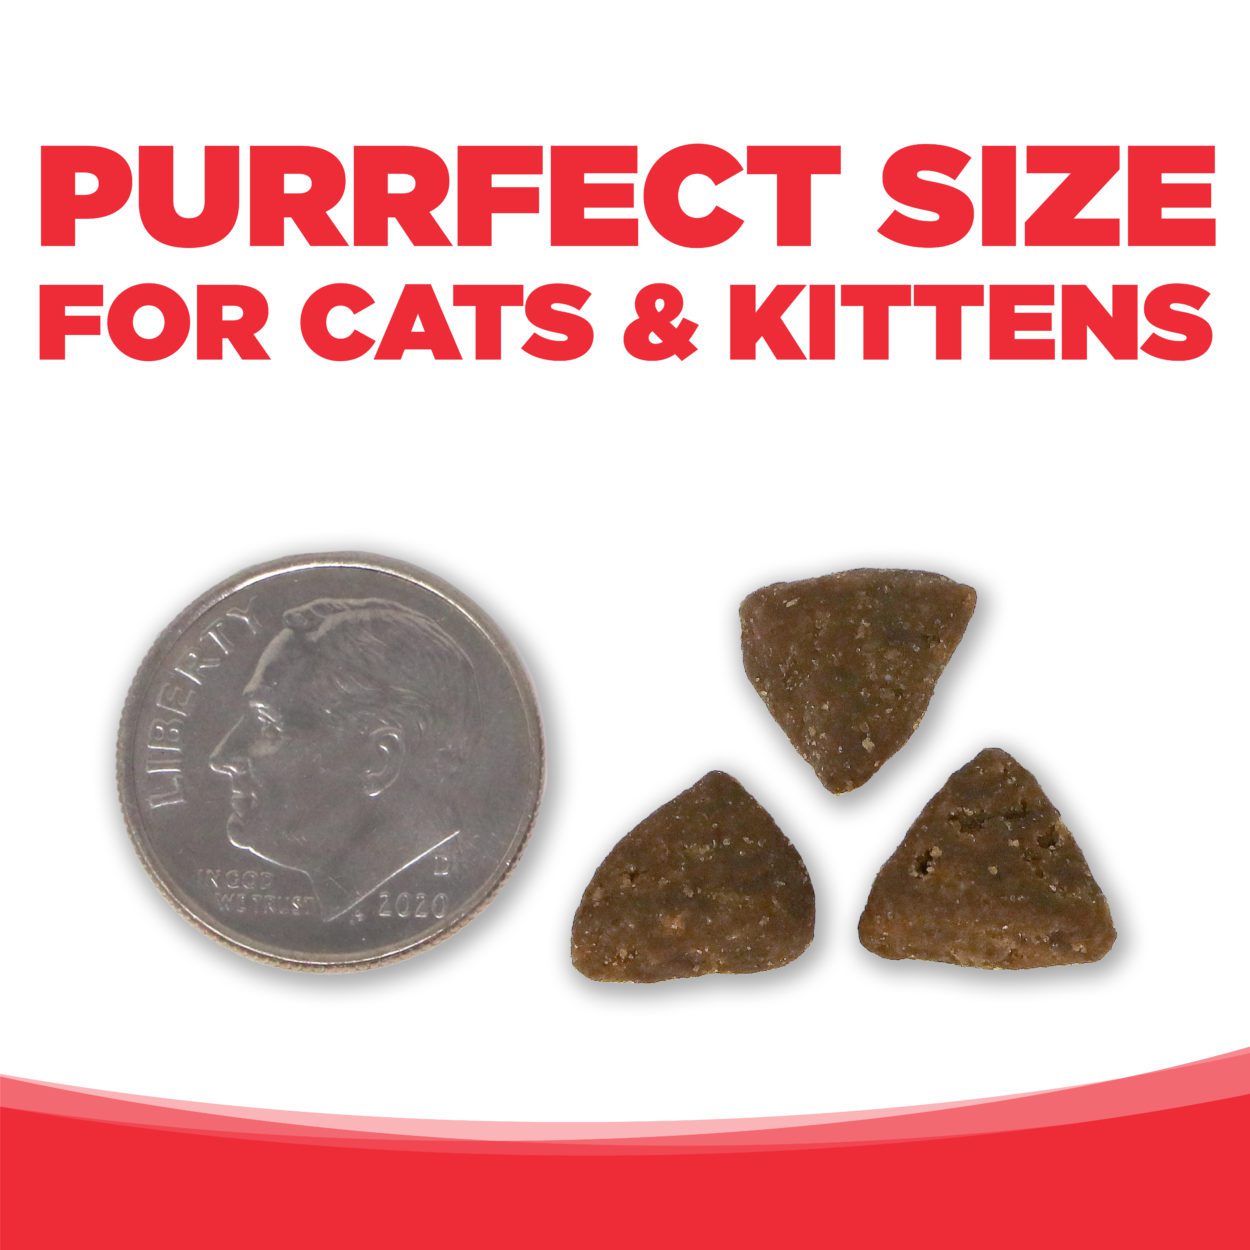 PURRFECT SIZE FOR CATS & KITTENS